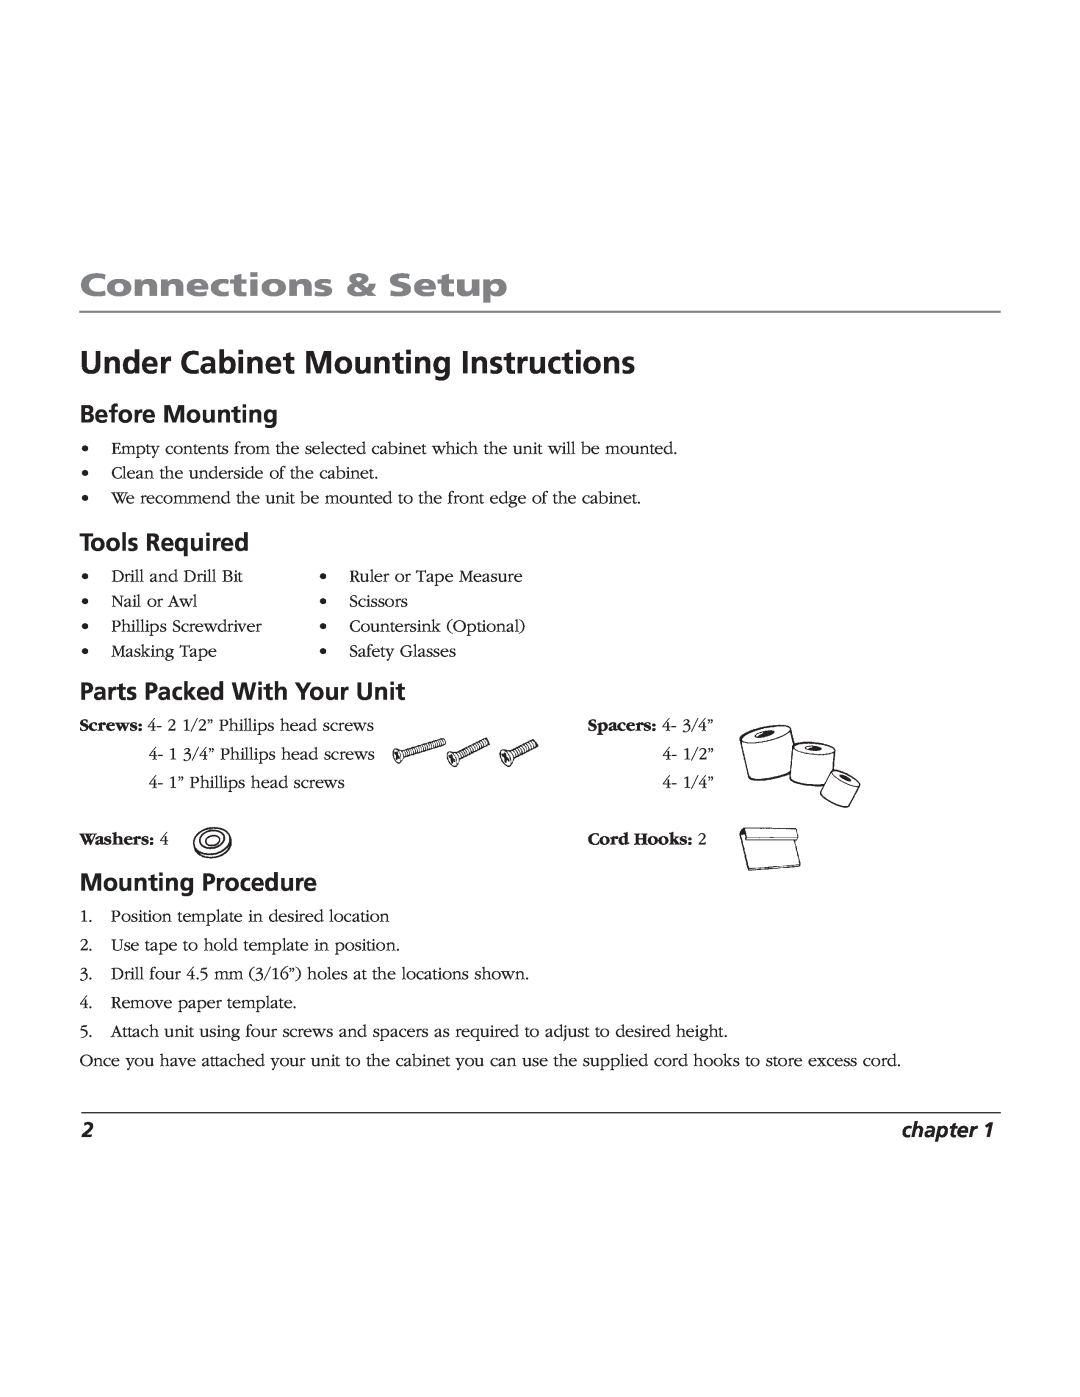 RCA BLC524 Connections & Setup, Under Cabinet Mounting Instructions, Before Mounting, Tools Required, Mounting Procedure 